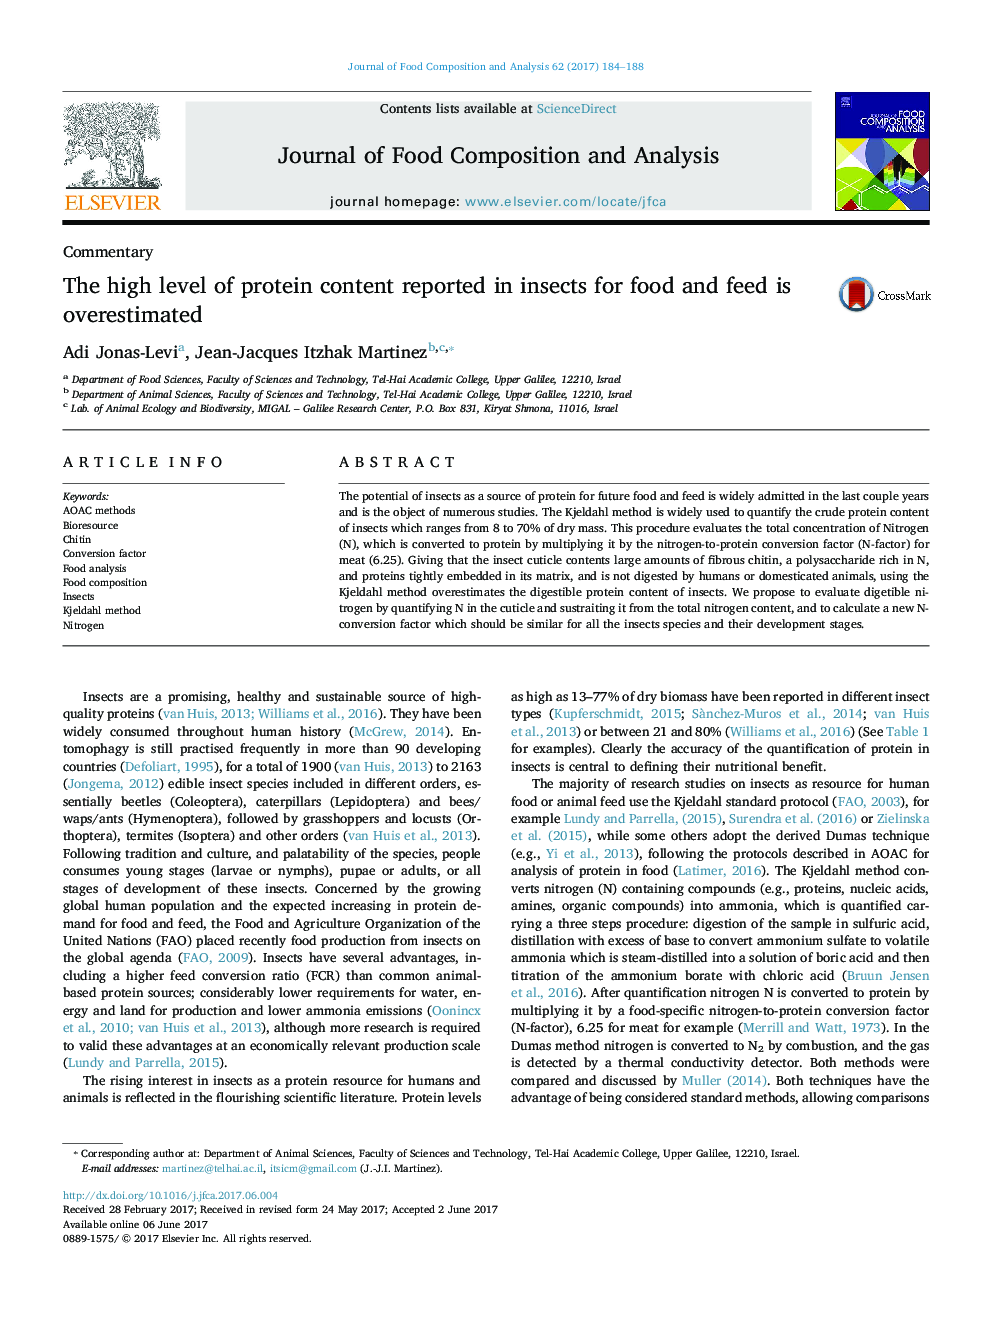 CommentaryThe high level of protein content reported in insects for food and feed is overestimated